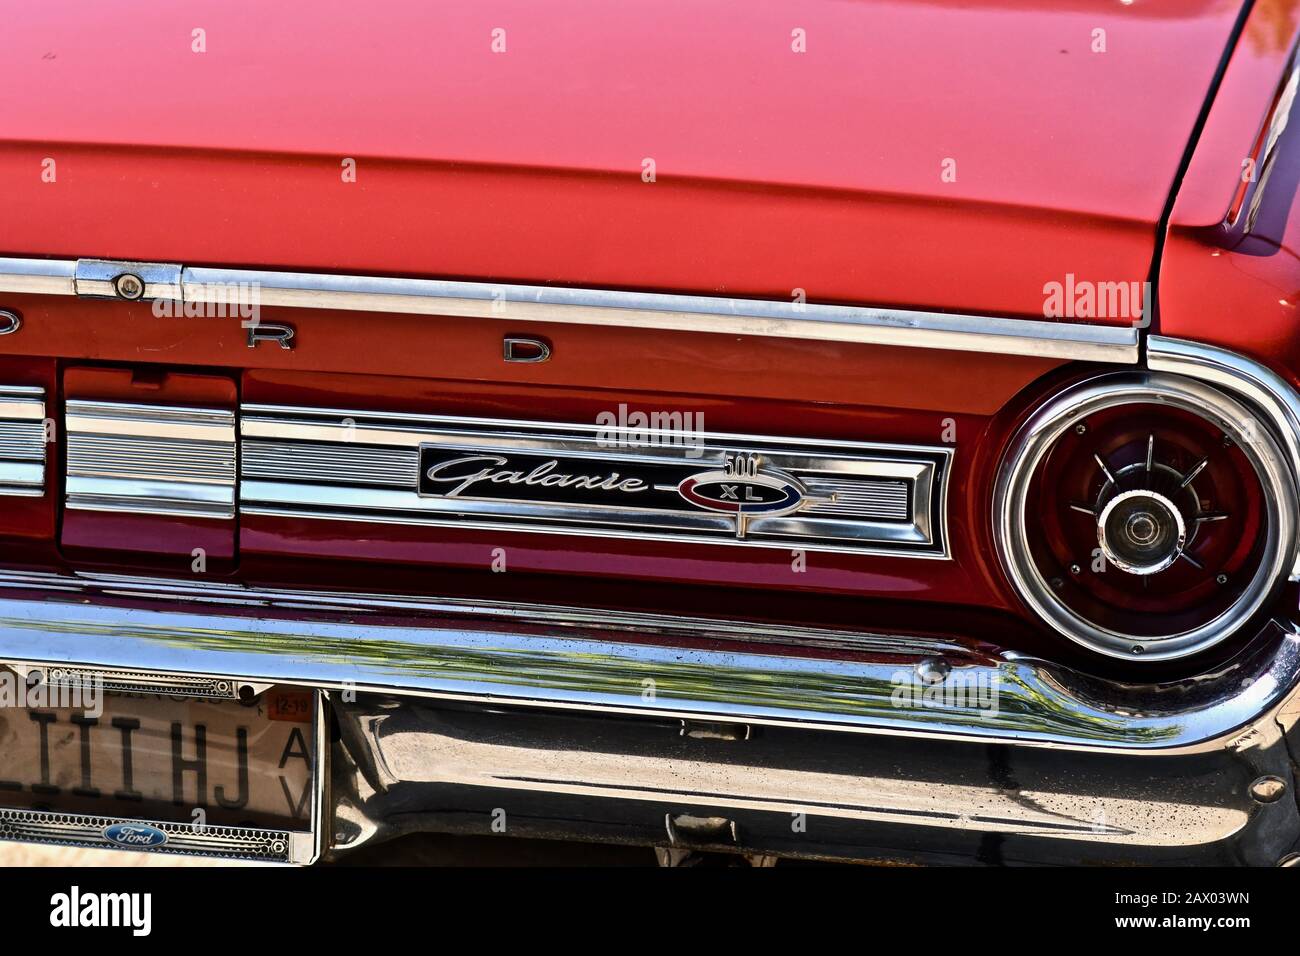 DOWNERS GROVE, UNITED STATES - Jun 07, 2019: An old red Barracuda car in the parking lot of Downers Grove, United States Stock Photo